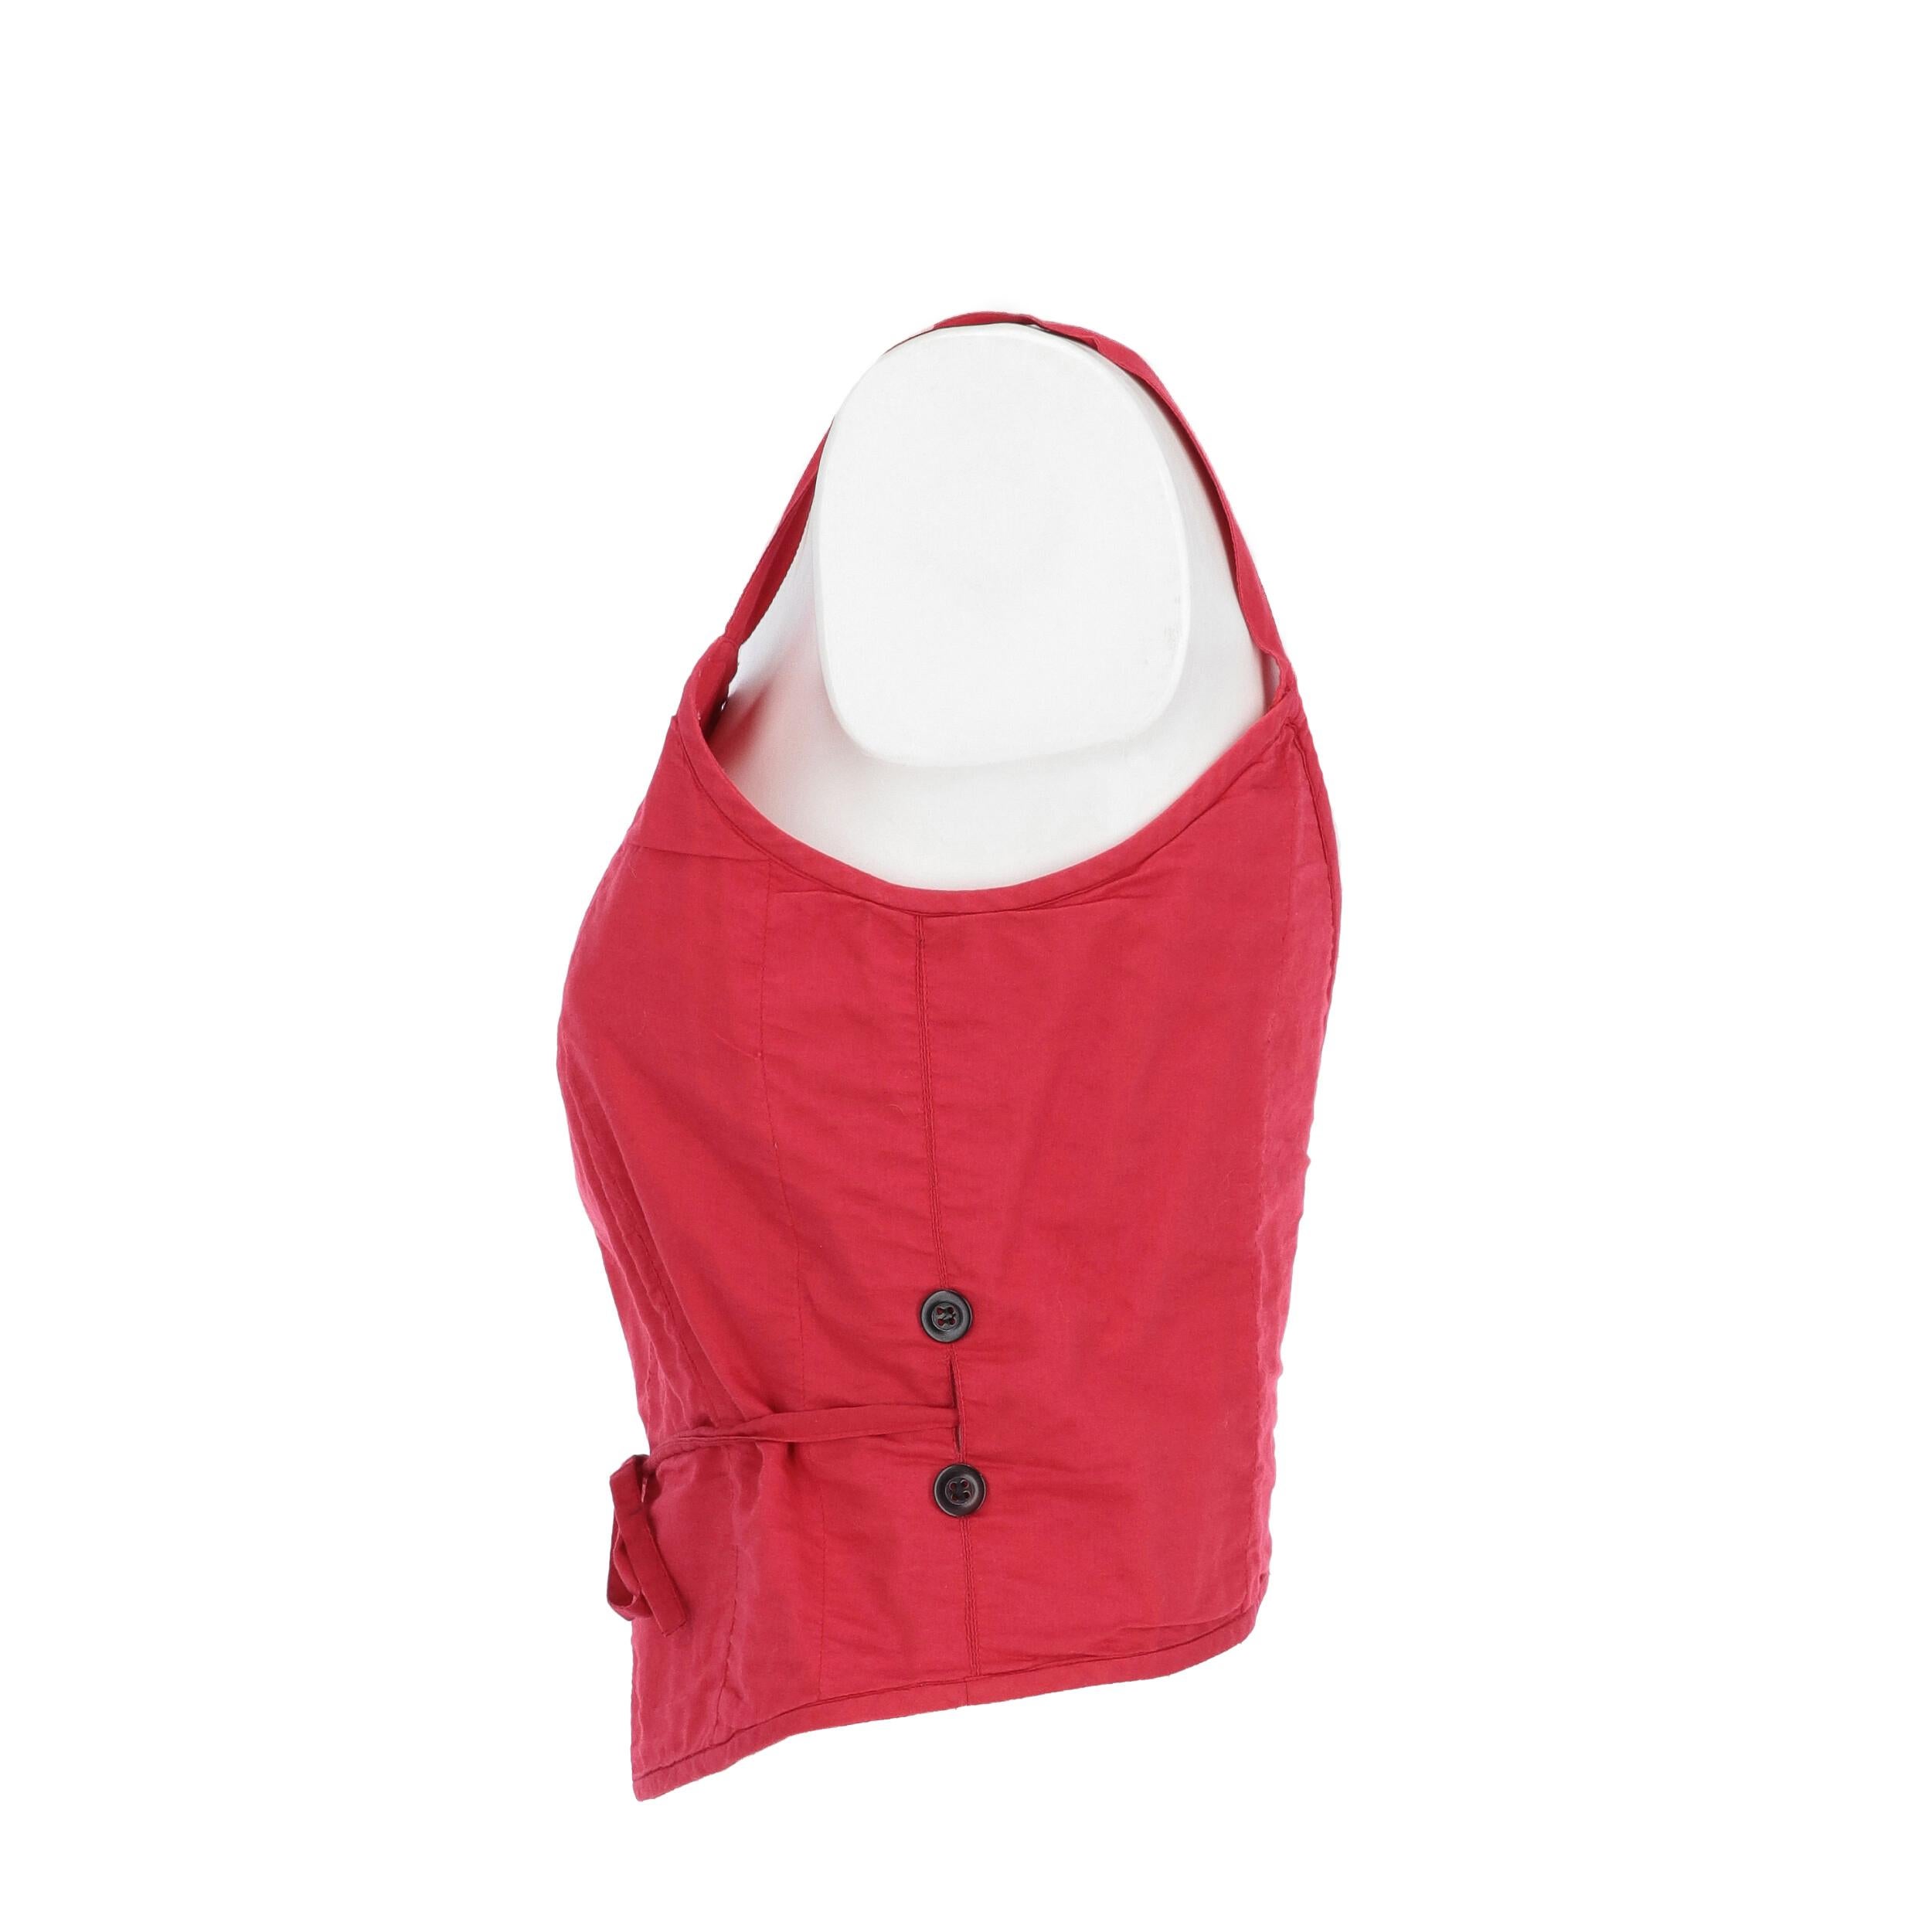 Dries Van Noten raspberry red cotton tank top with straps. Square neckline, open back, decorative front buttons and drawstring fastening.

Years: 90s
Made in Belgium
Size: 36 EU

Flat measurements
Height: 42,5 cm
Bust: 44